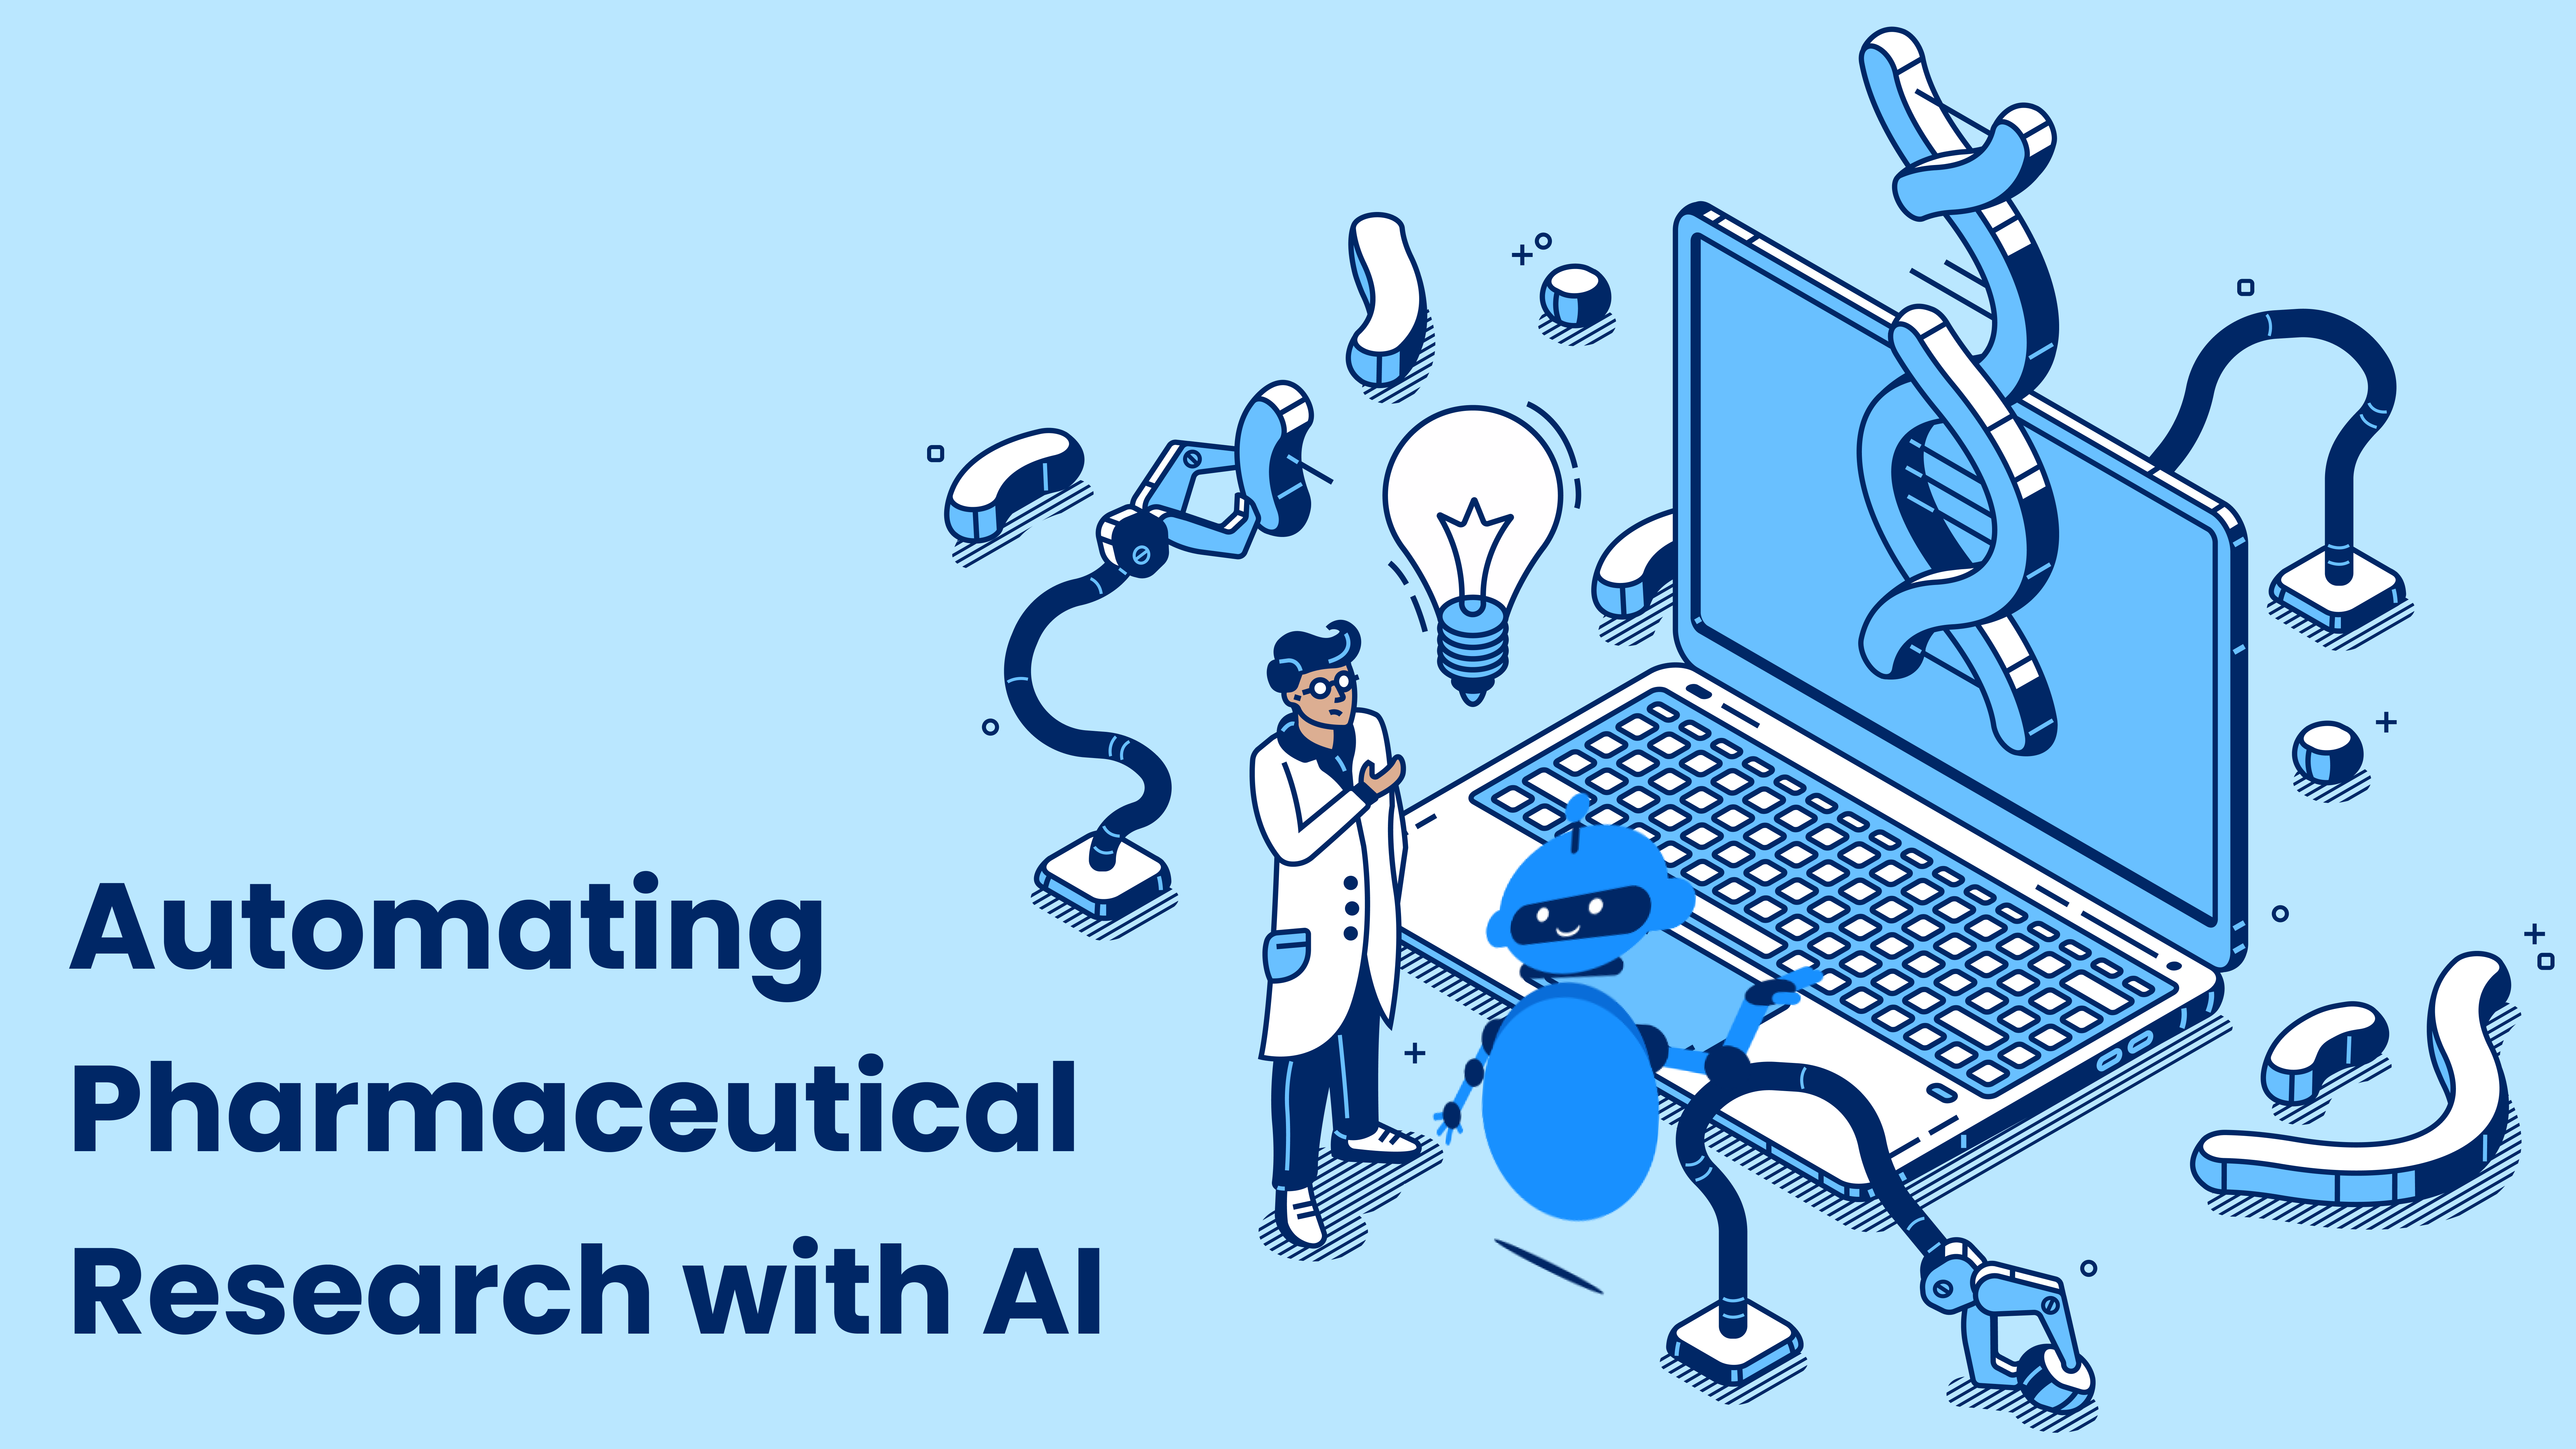 AI in Pharmaceutical Research: The Case for Automation